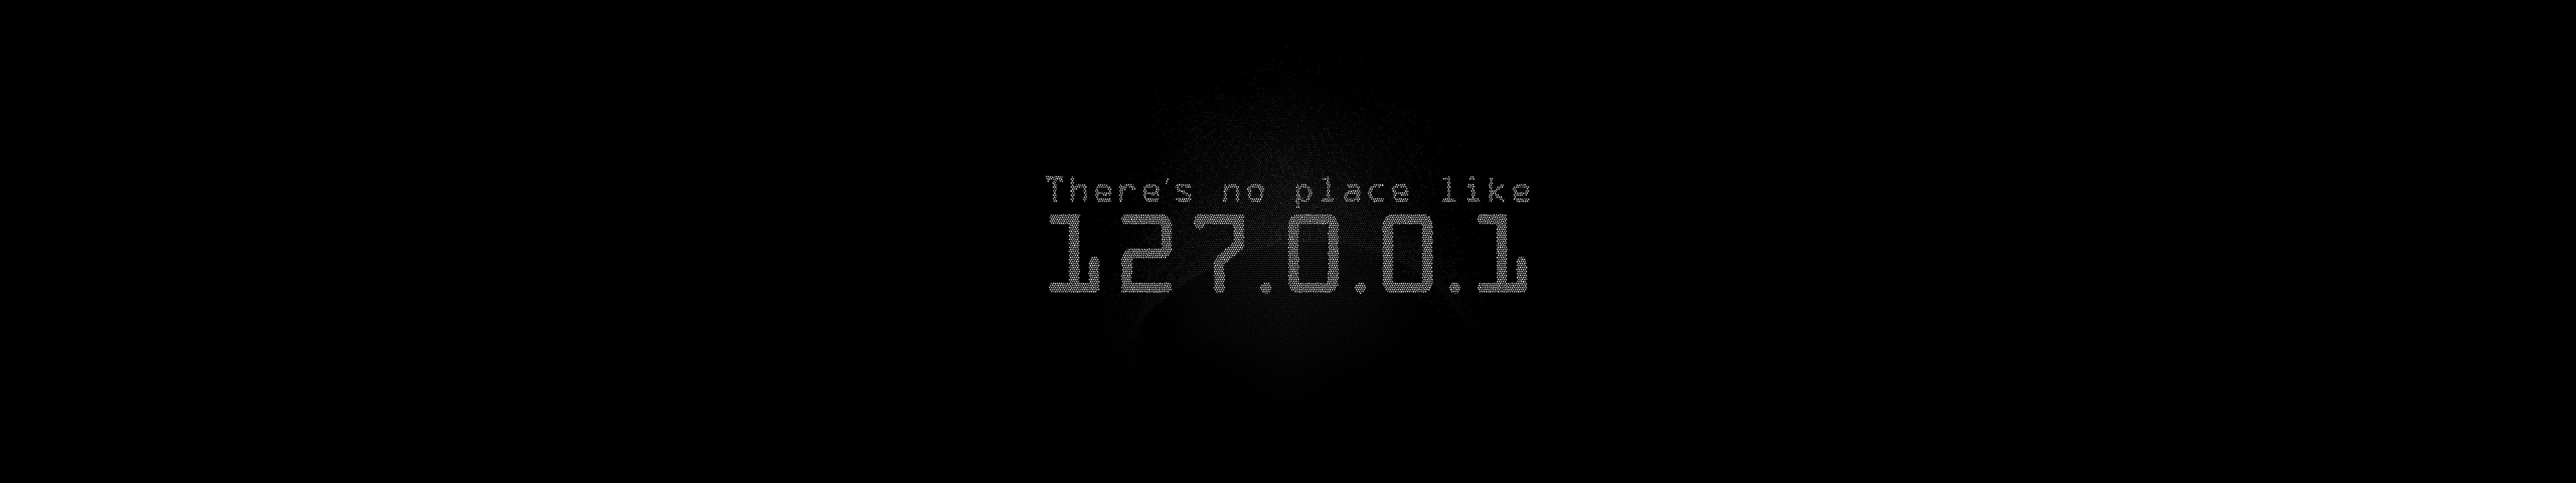 there's no place like 127.0.0.1 poster, triple screen, simple background